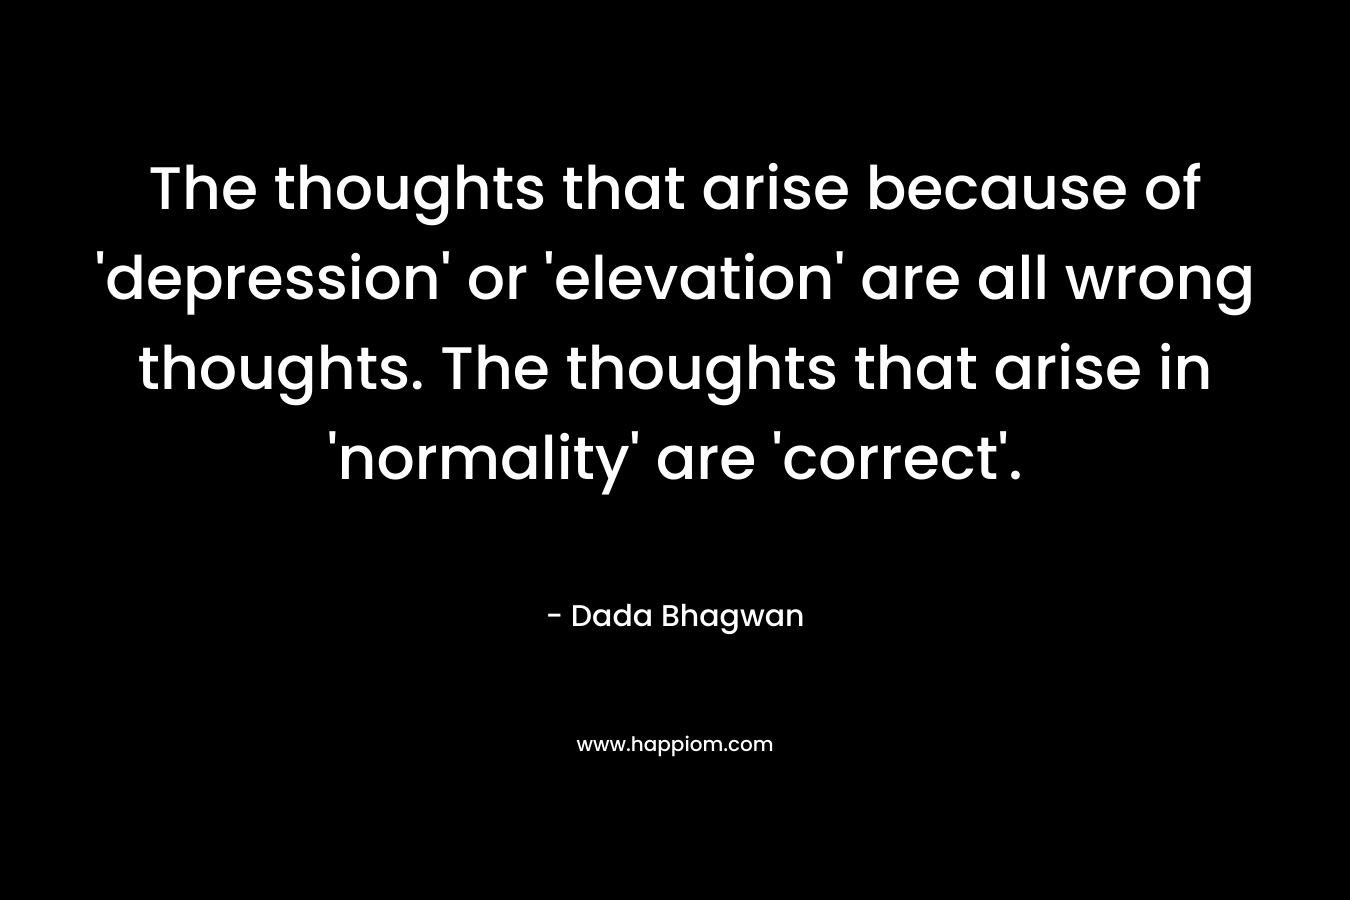 The thoughts that arise because of 'depression' or 'elevation' are all wrong thoughts. The thoughts that arise in 'normality' are 'correct'.